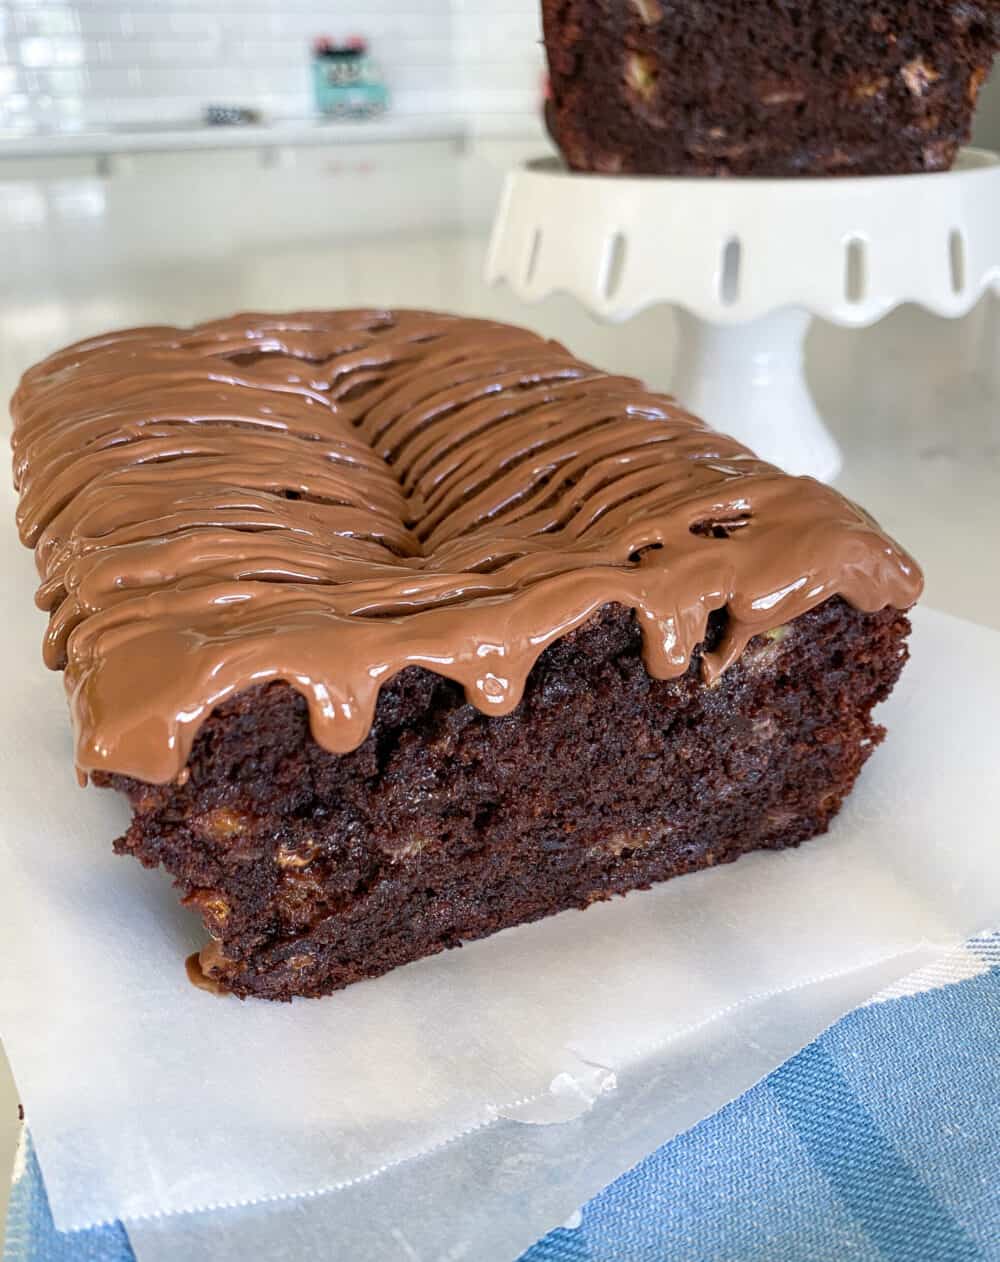 drizzle melted chocolate over baked banana bread